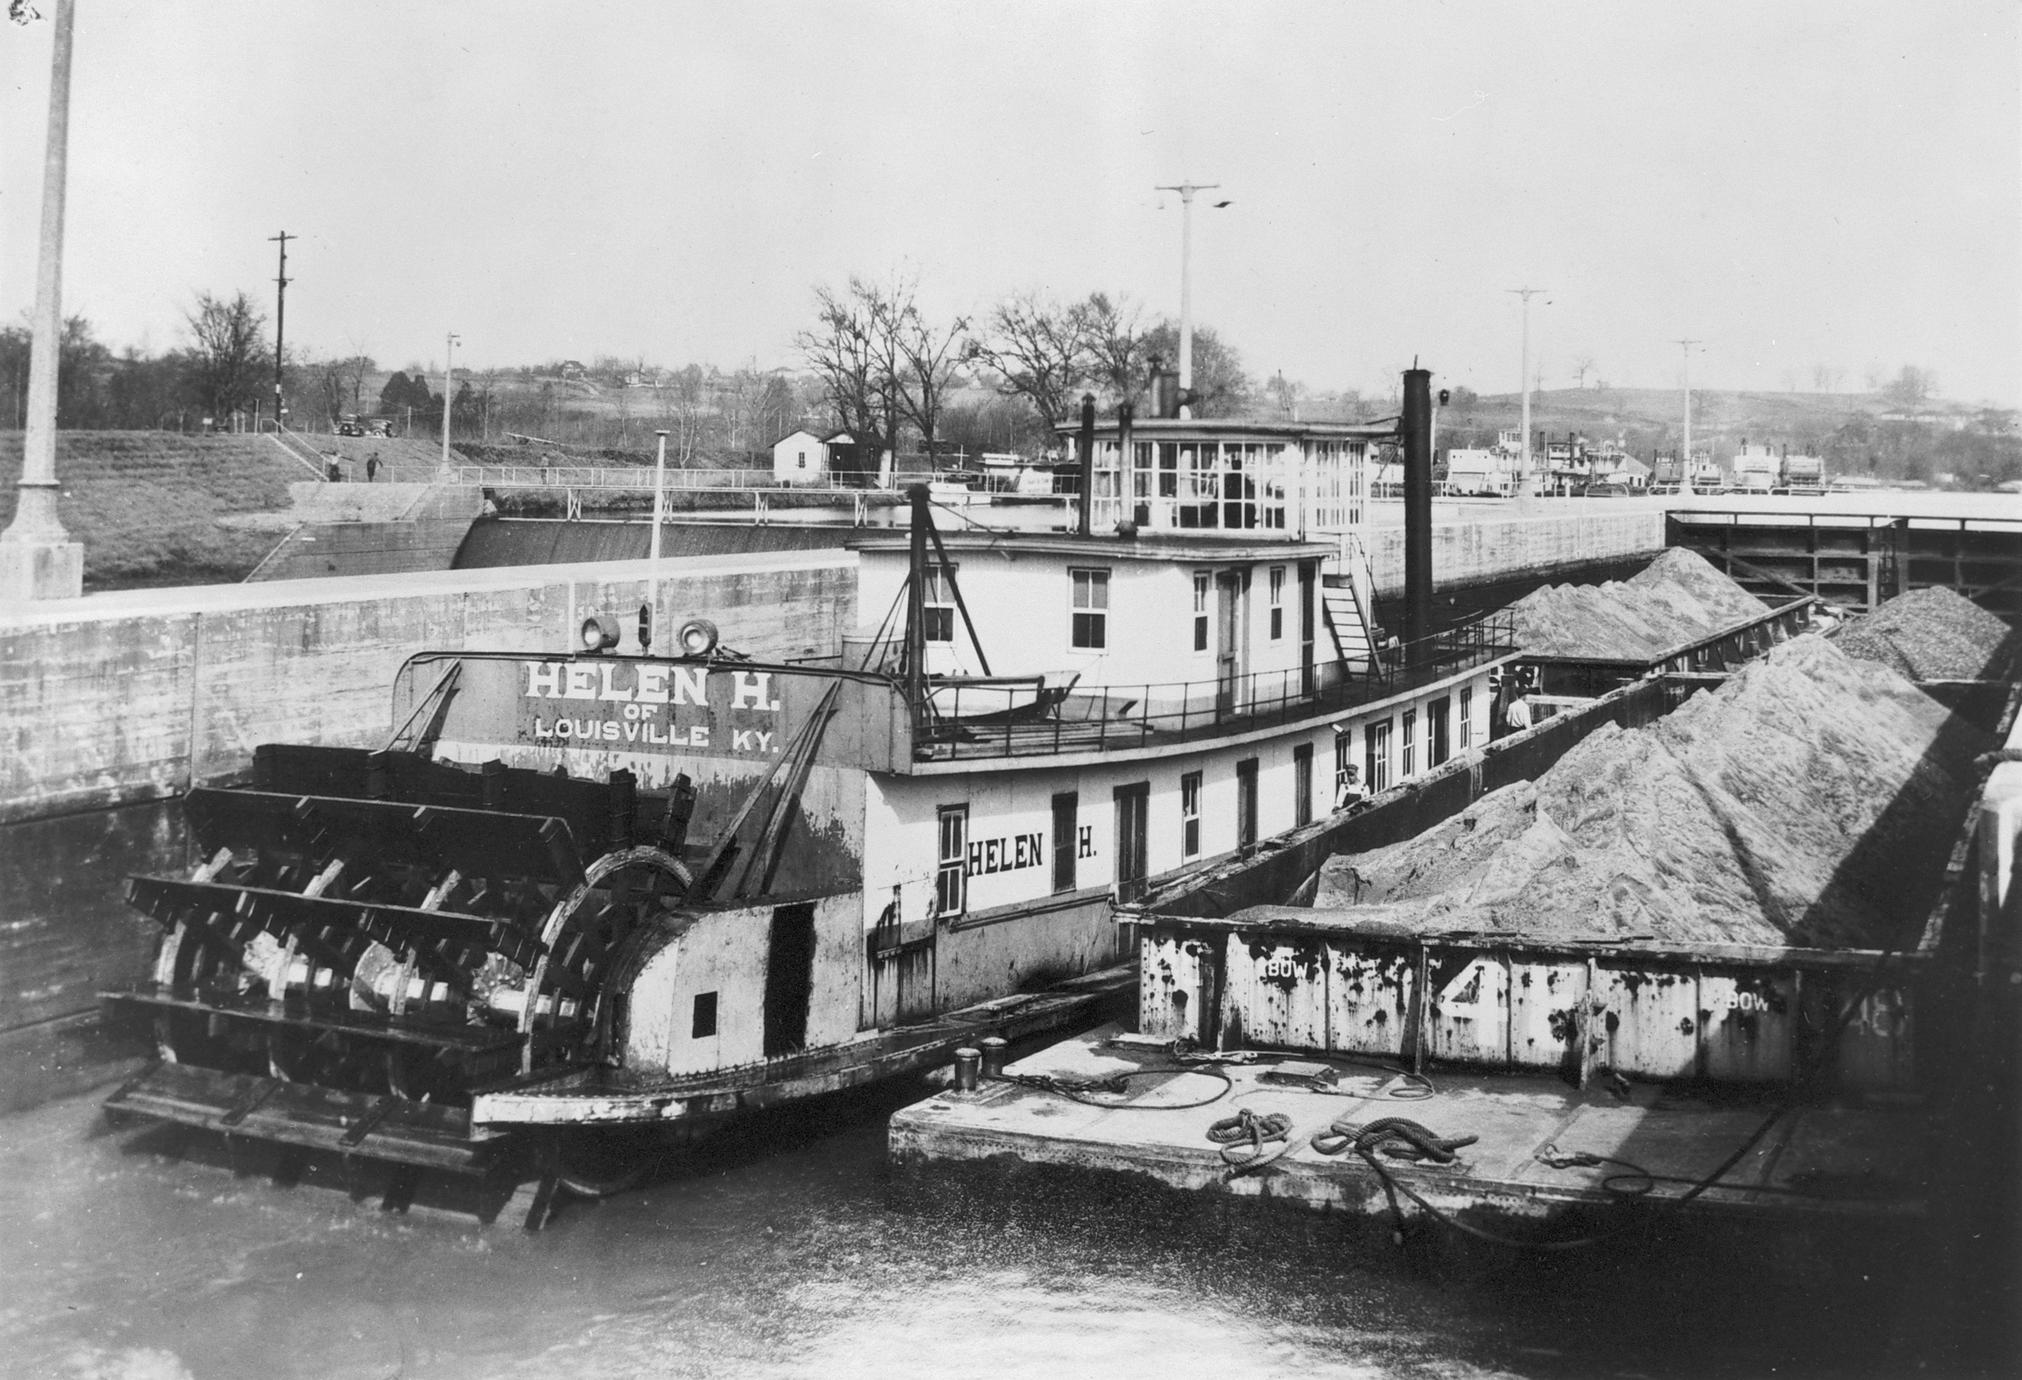 Helen H. (Towboat)